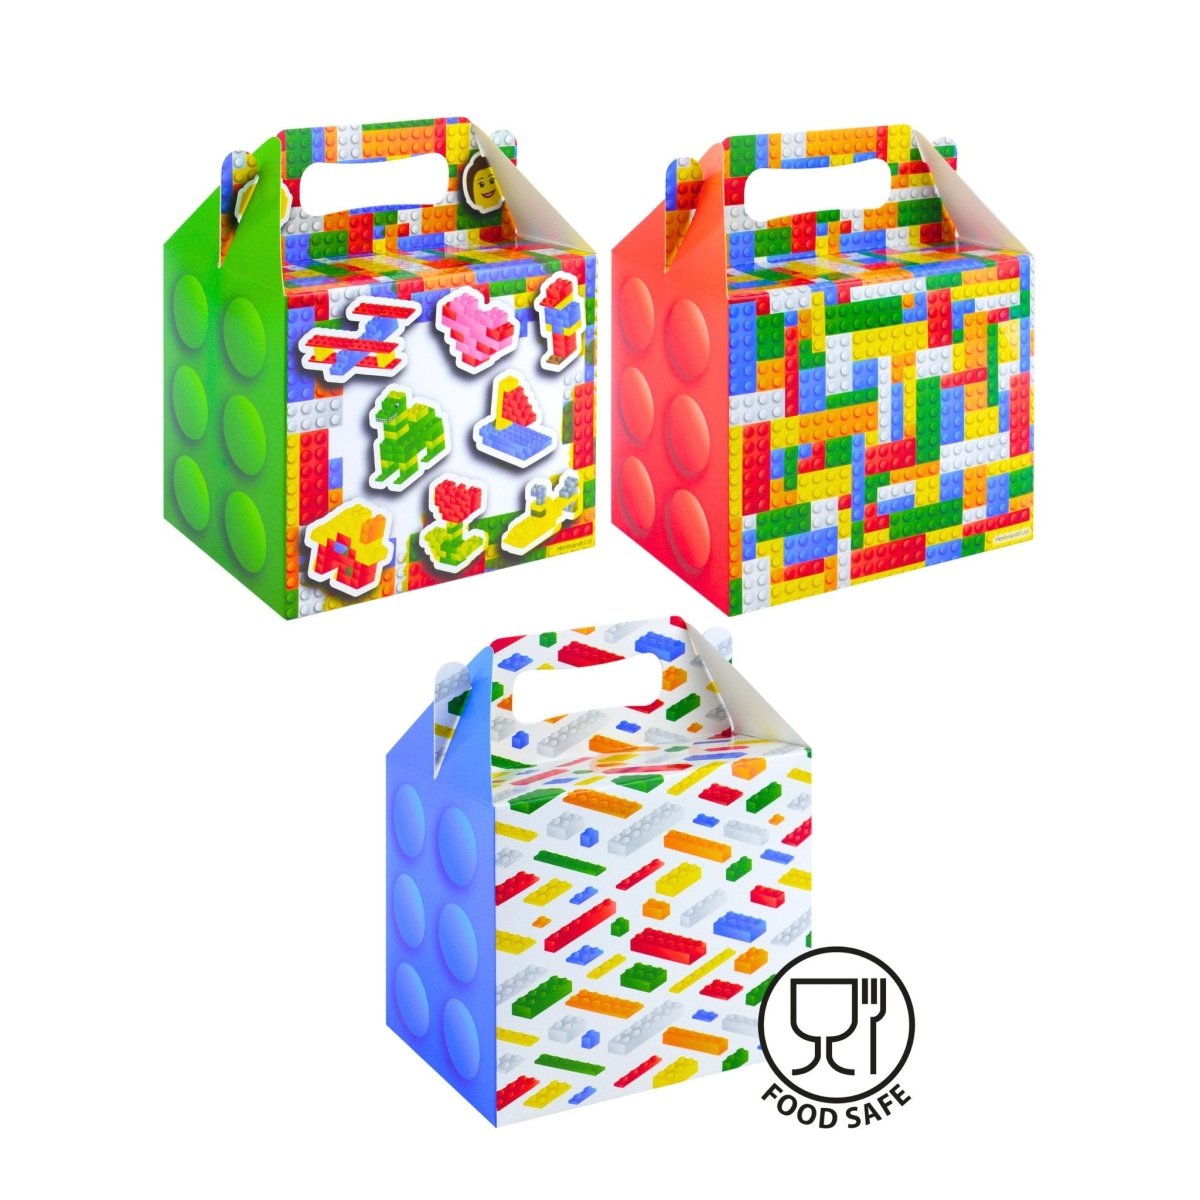 Brickz Party Food Boxes - Kids Party Craft